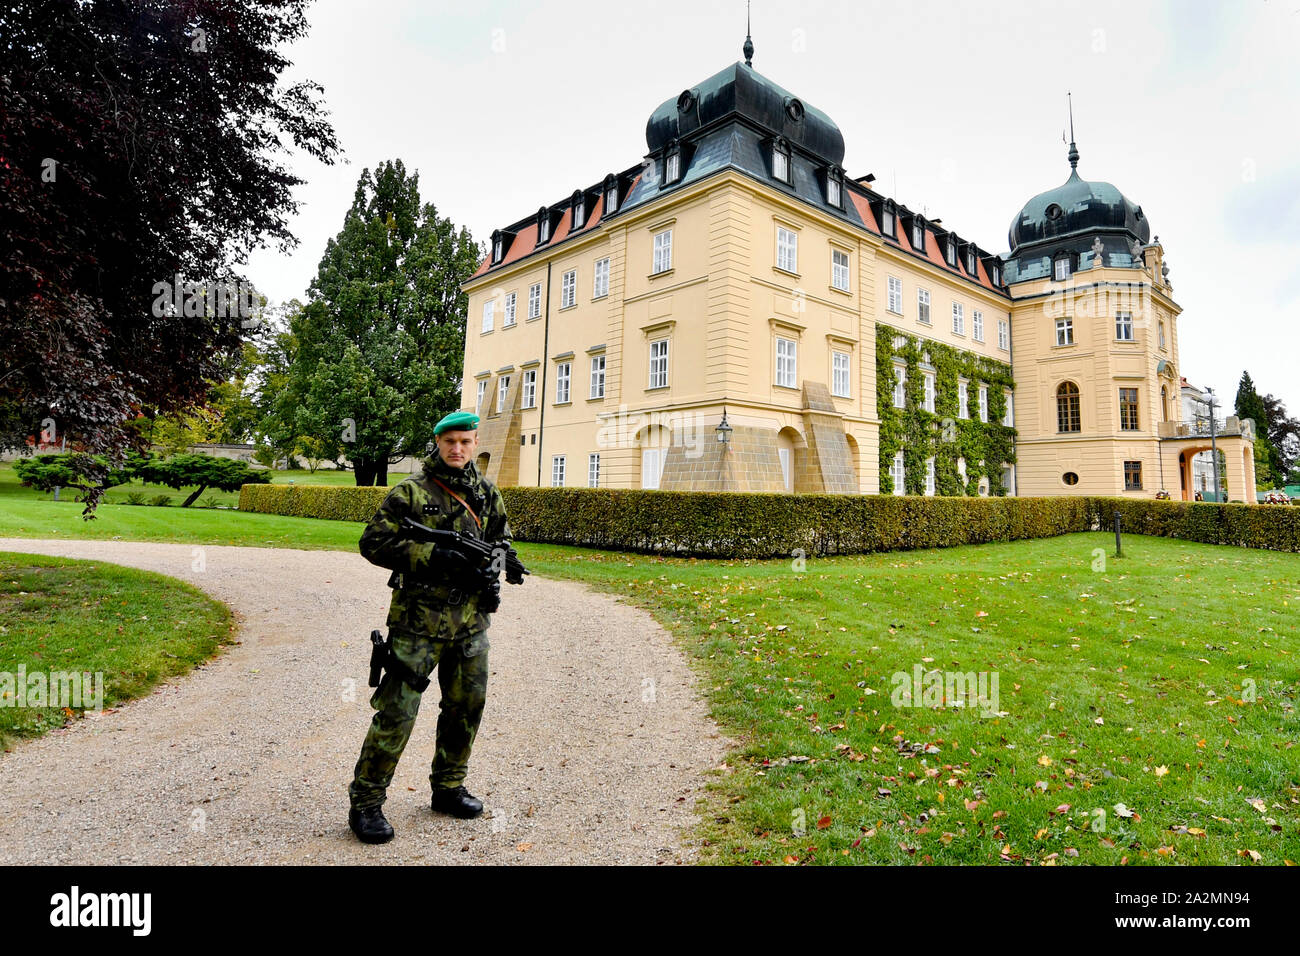 Heavily armed Prague Castle Guard soldier guards the Lany chateau, Czech Republic, on Thursday, October 3, 2019, during the plenary session of Visegra Stock Photo